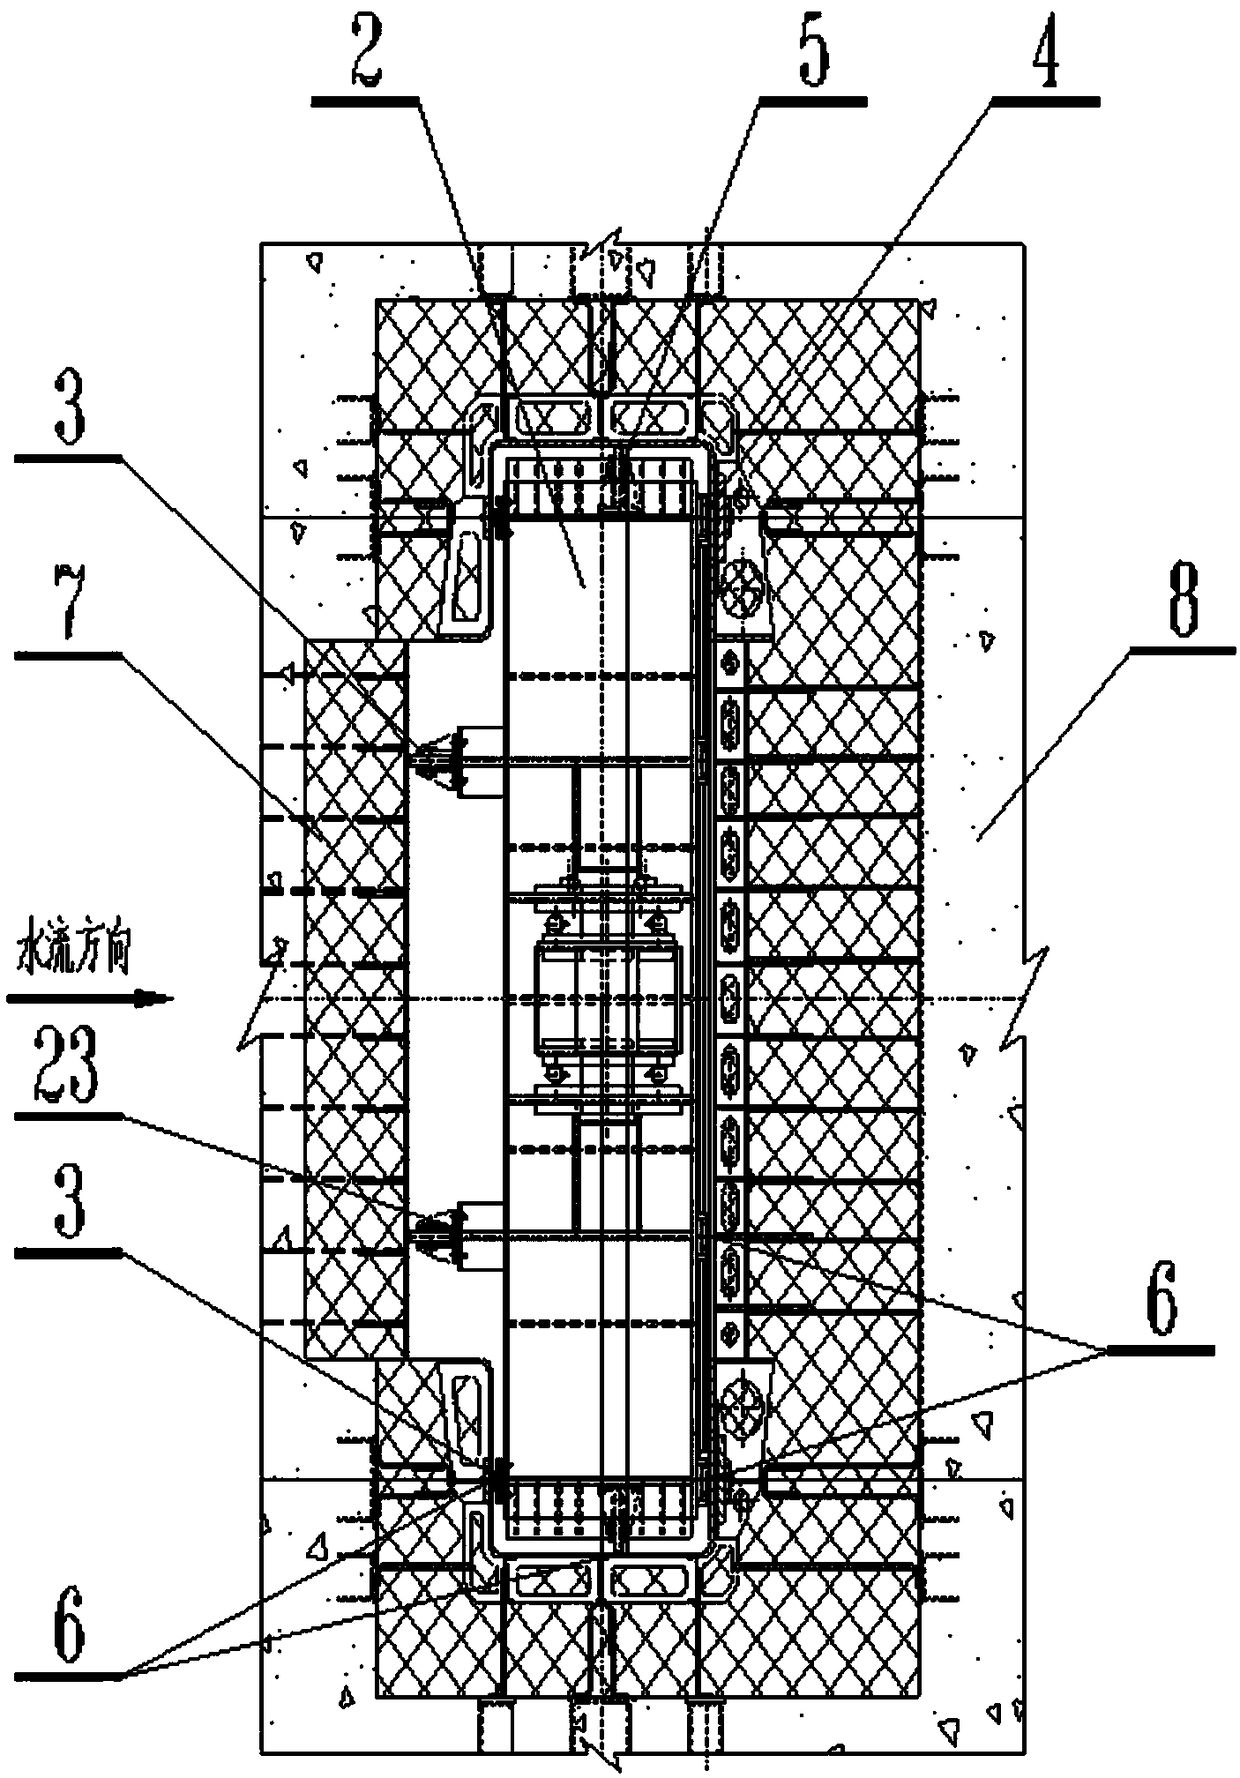 Improvement method and structure of a plane sliding gate with extra high water head